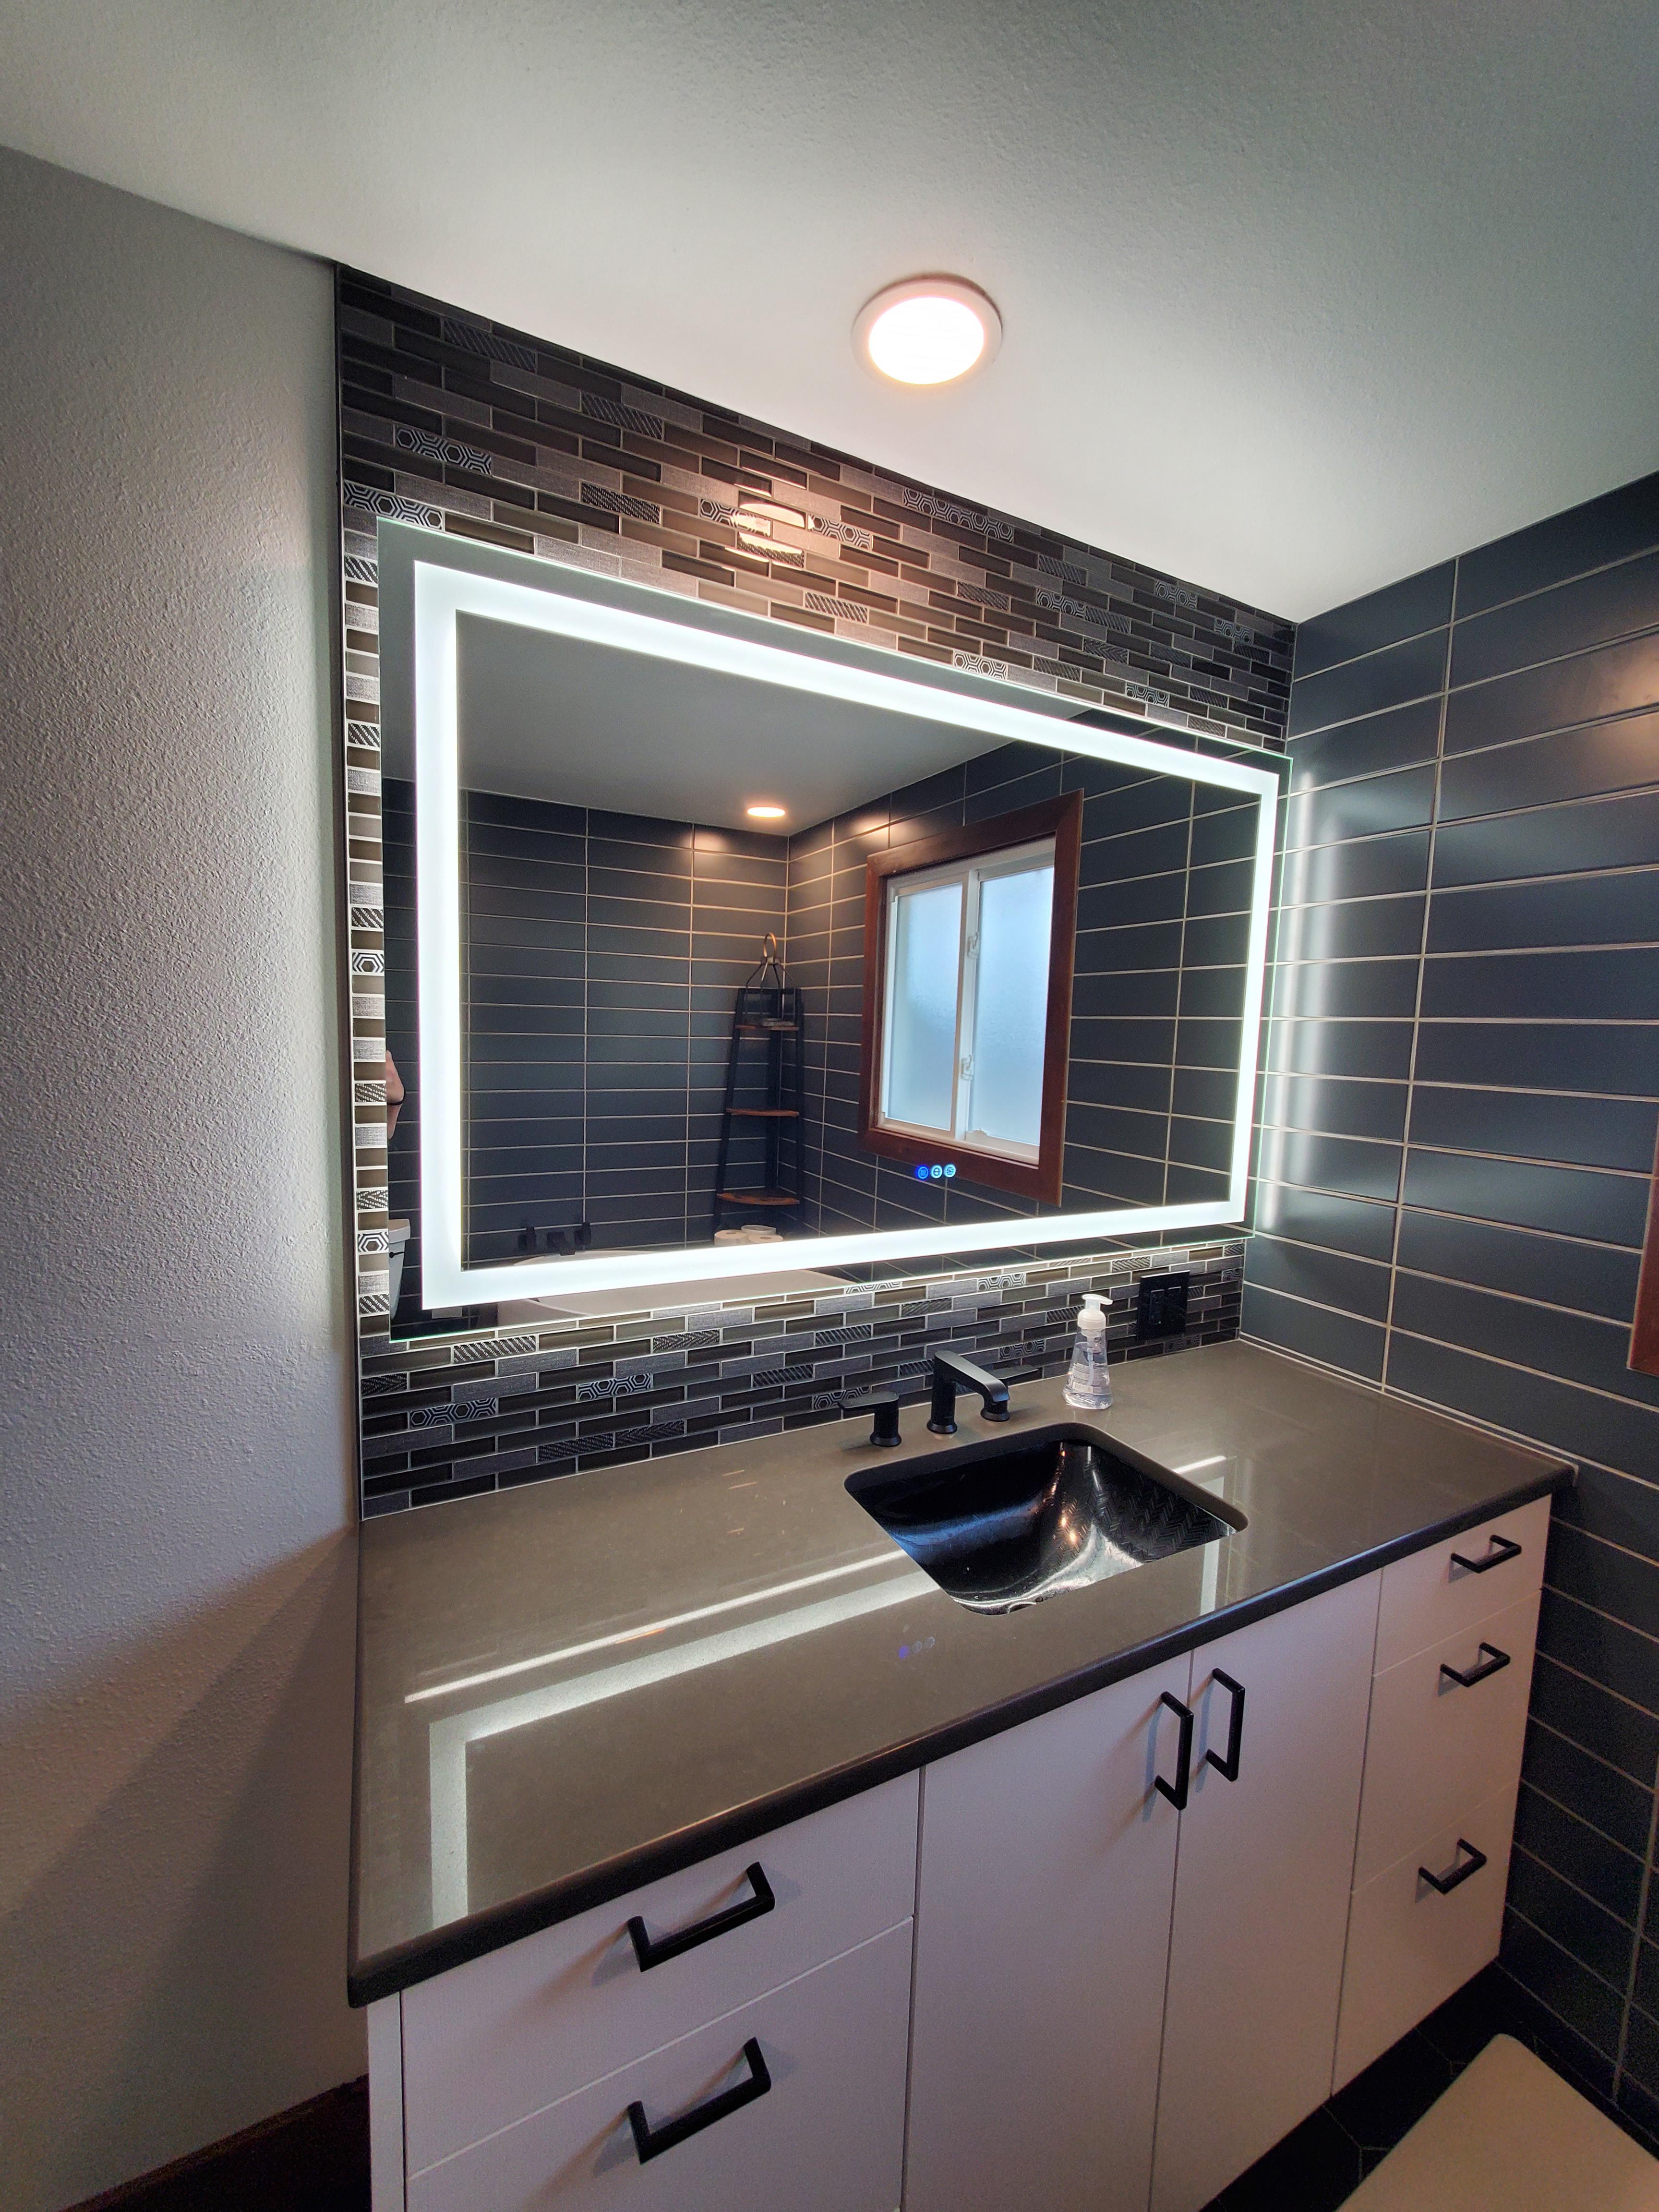 This lighted mirror makes the beautiful tile in the bathroom glow! DreamMaker Bath & Kitchen of Larimer County Fort Collins (970)616-0900